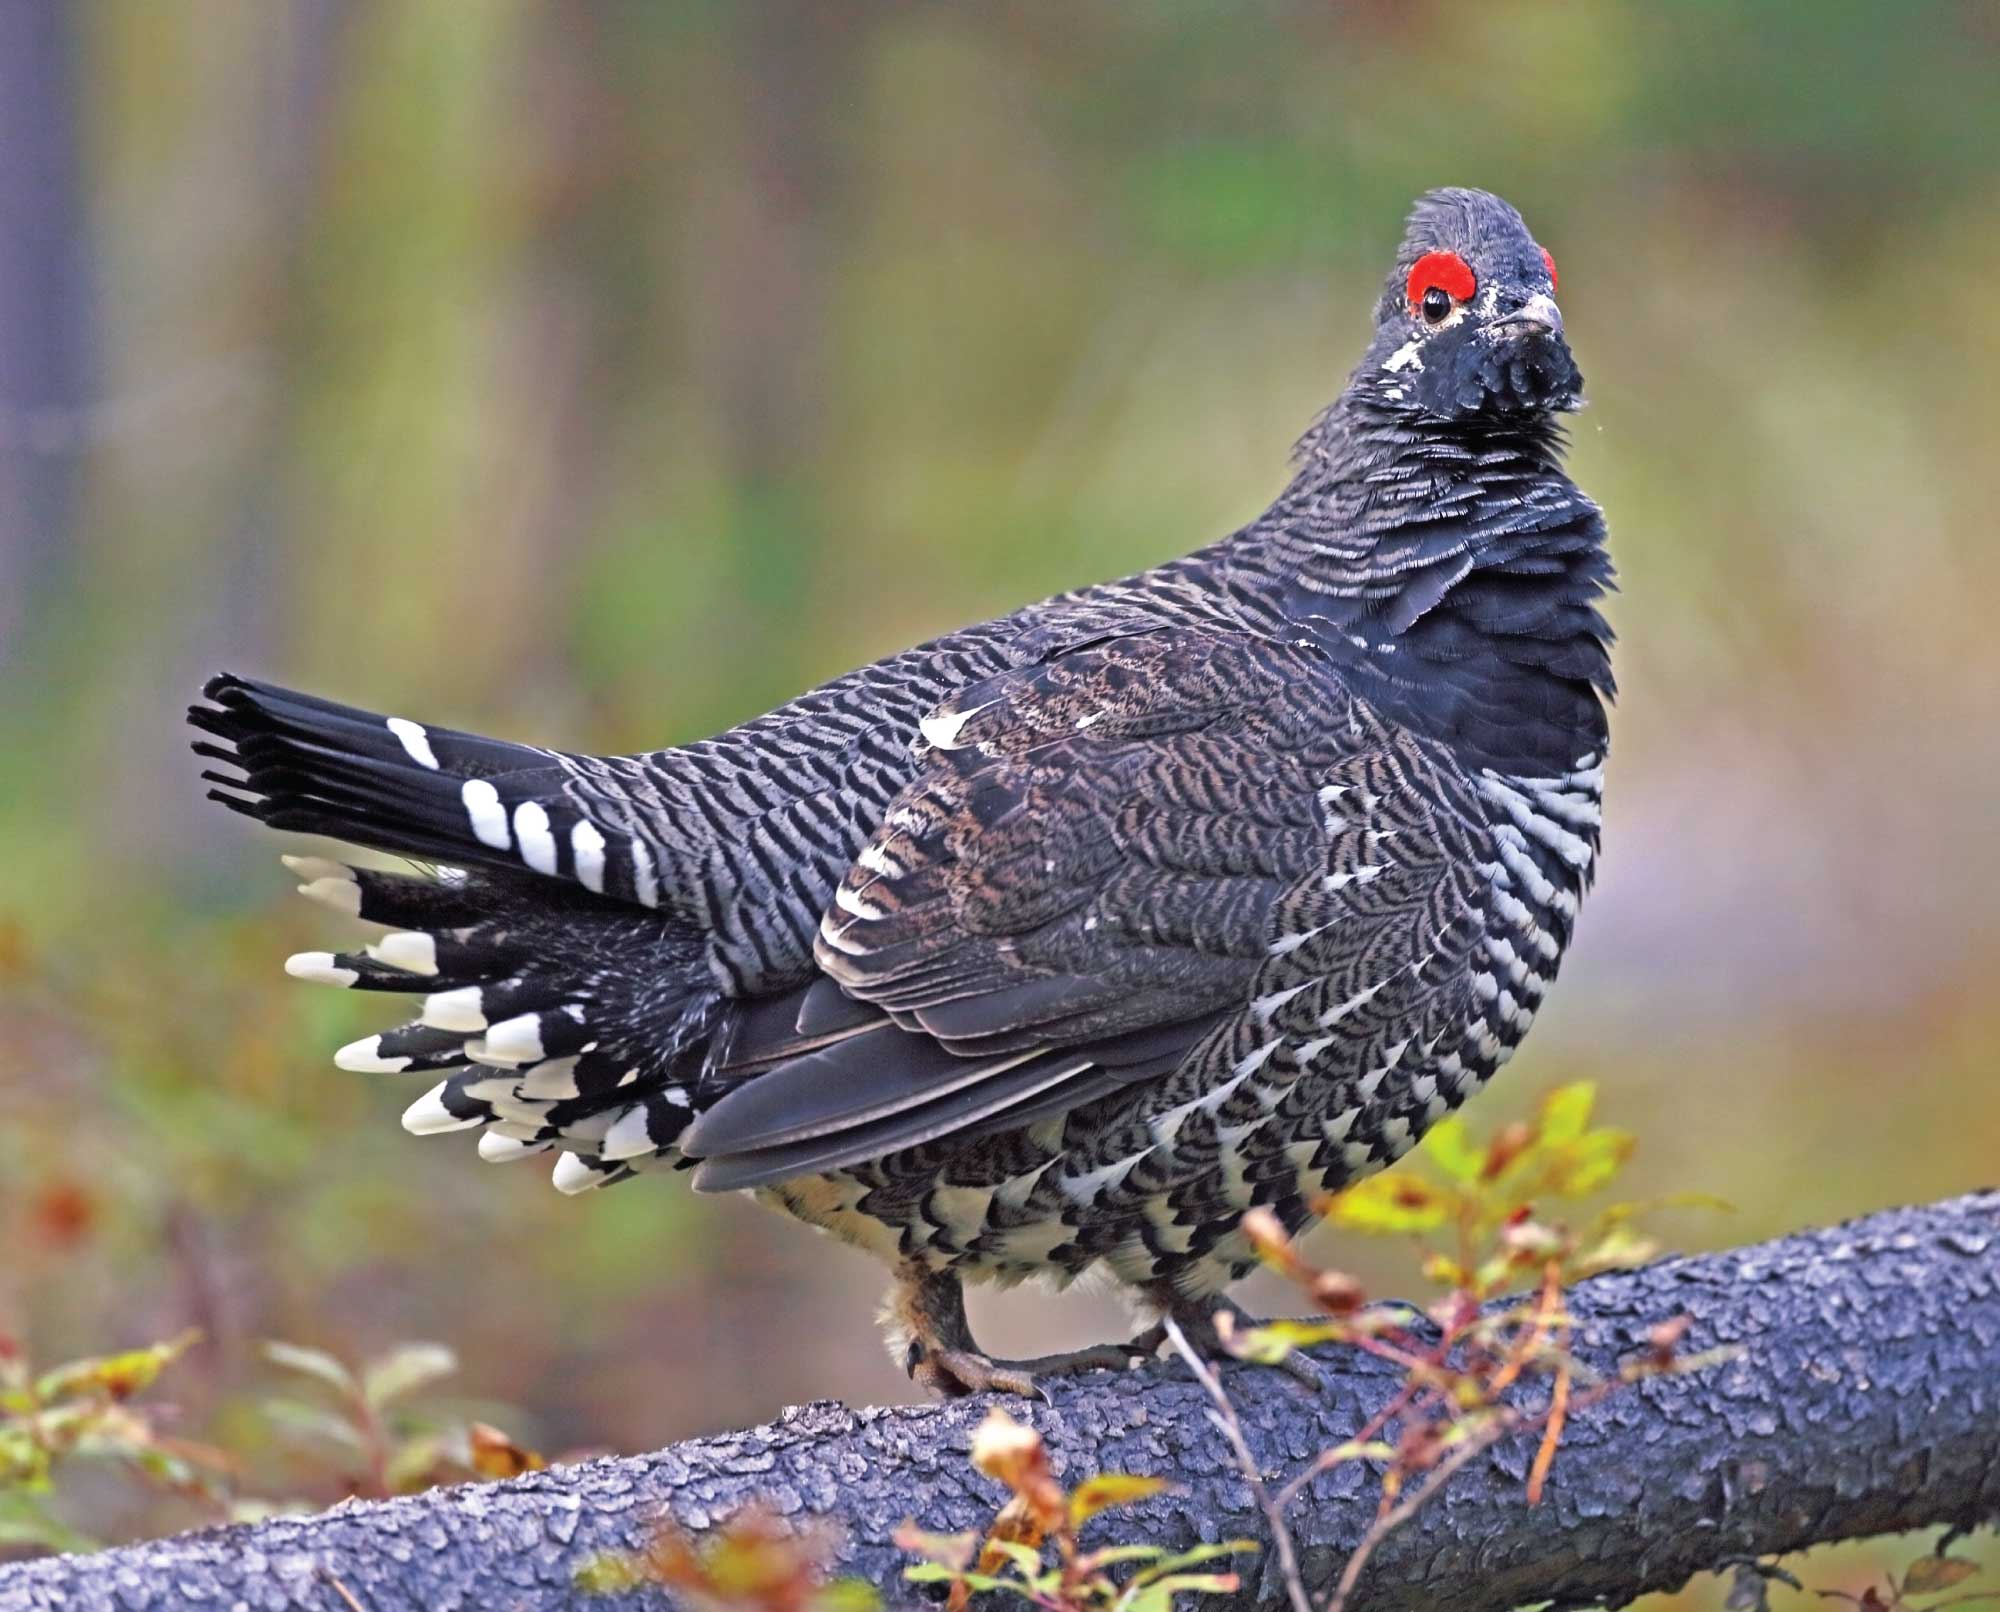 Spruce Grouse (Falcipennis canadensis) An Upland Game Bird Profile